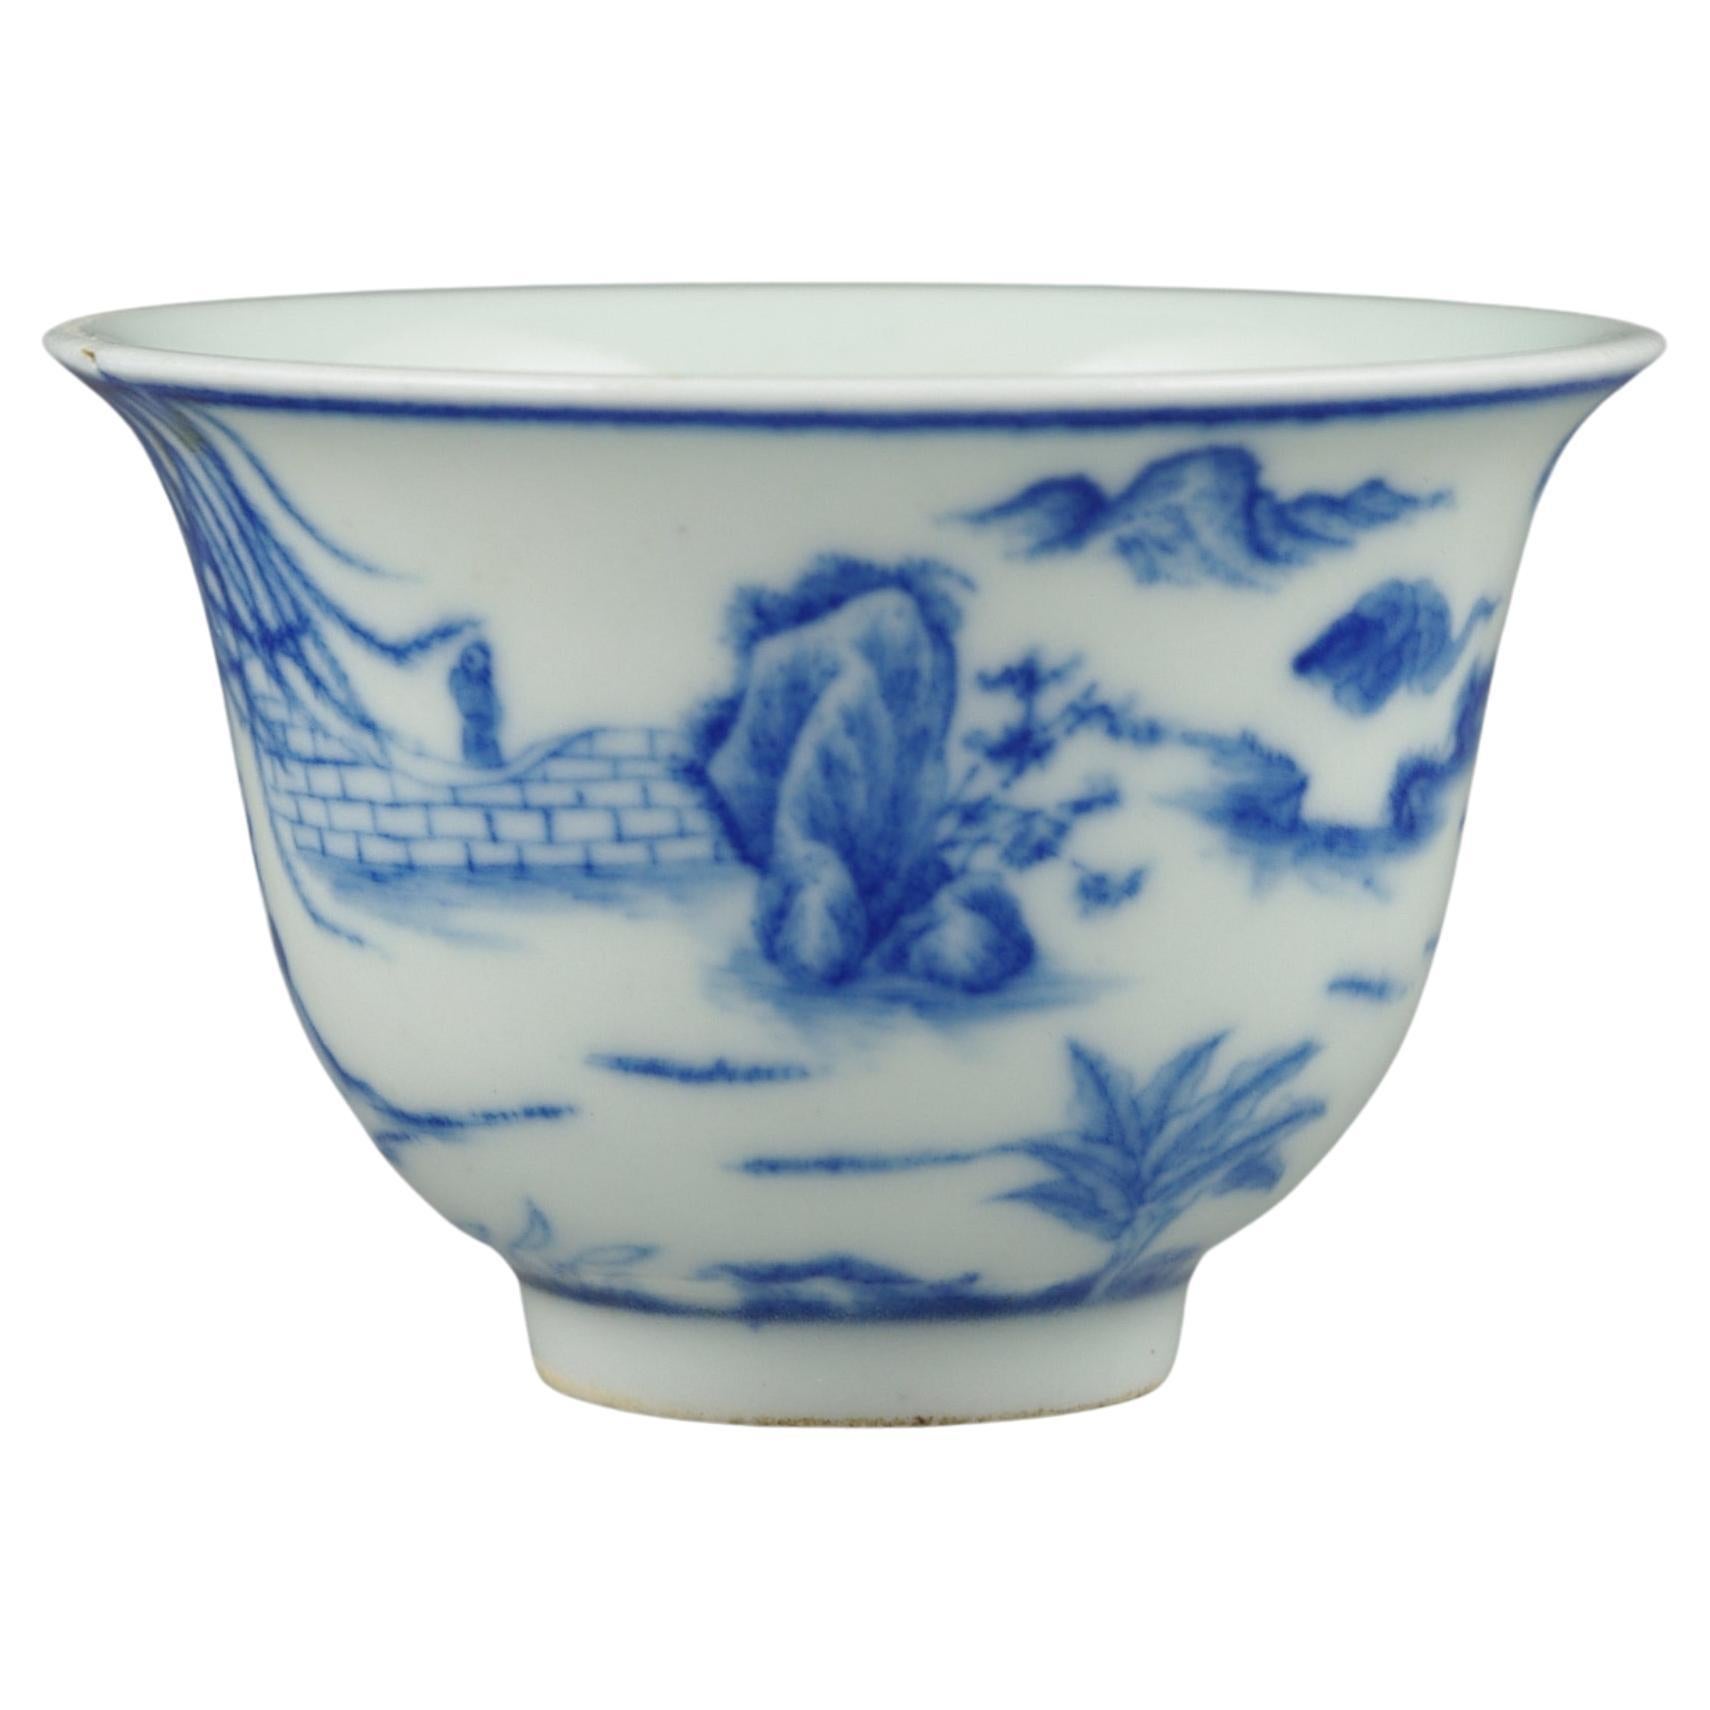 A fine Chinese porcelain wine cup, hand painted in underglaze blue with figures in various martial arts pursuits, with a four character Daoguang mark within the footring, and of the period

circa 1850, Qing Dynasty